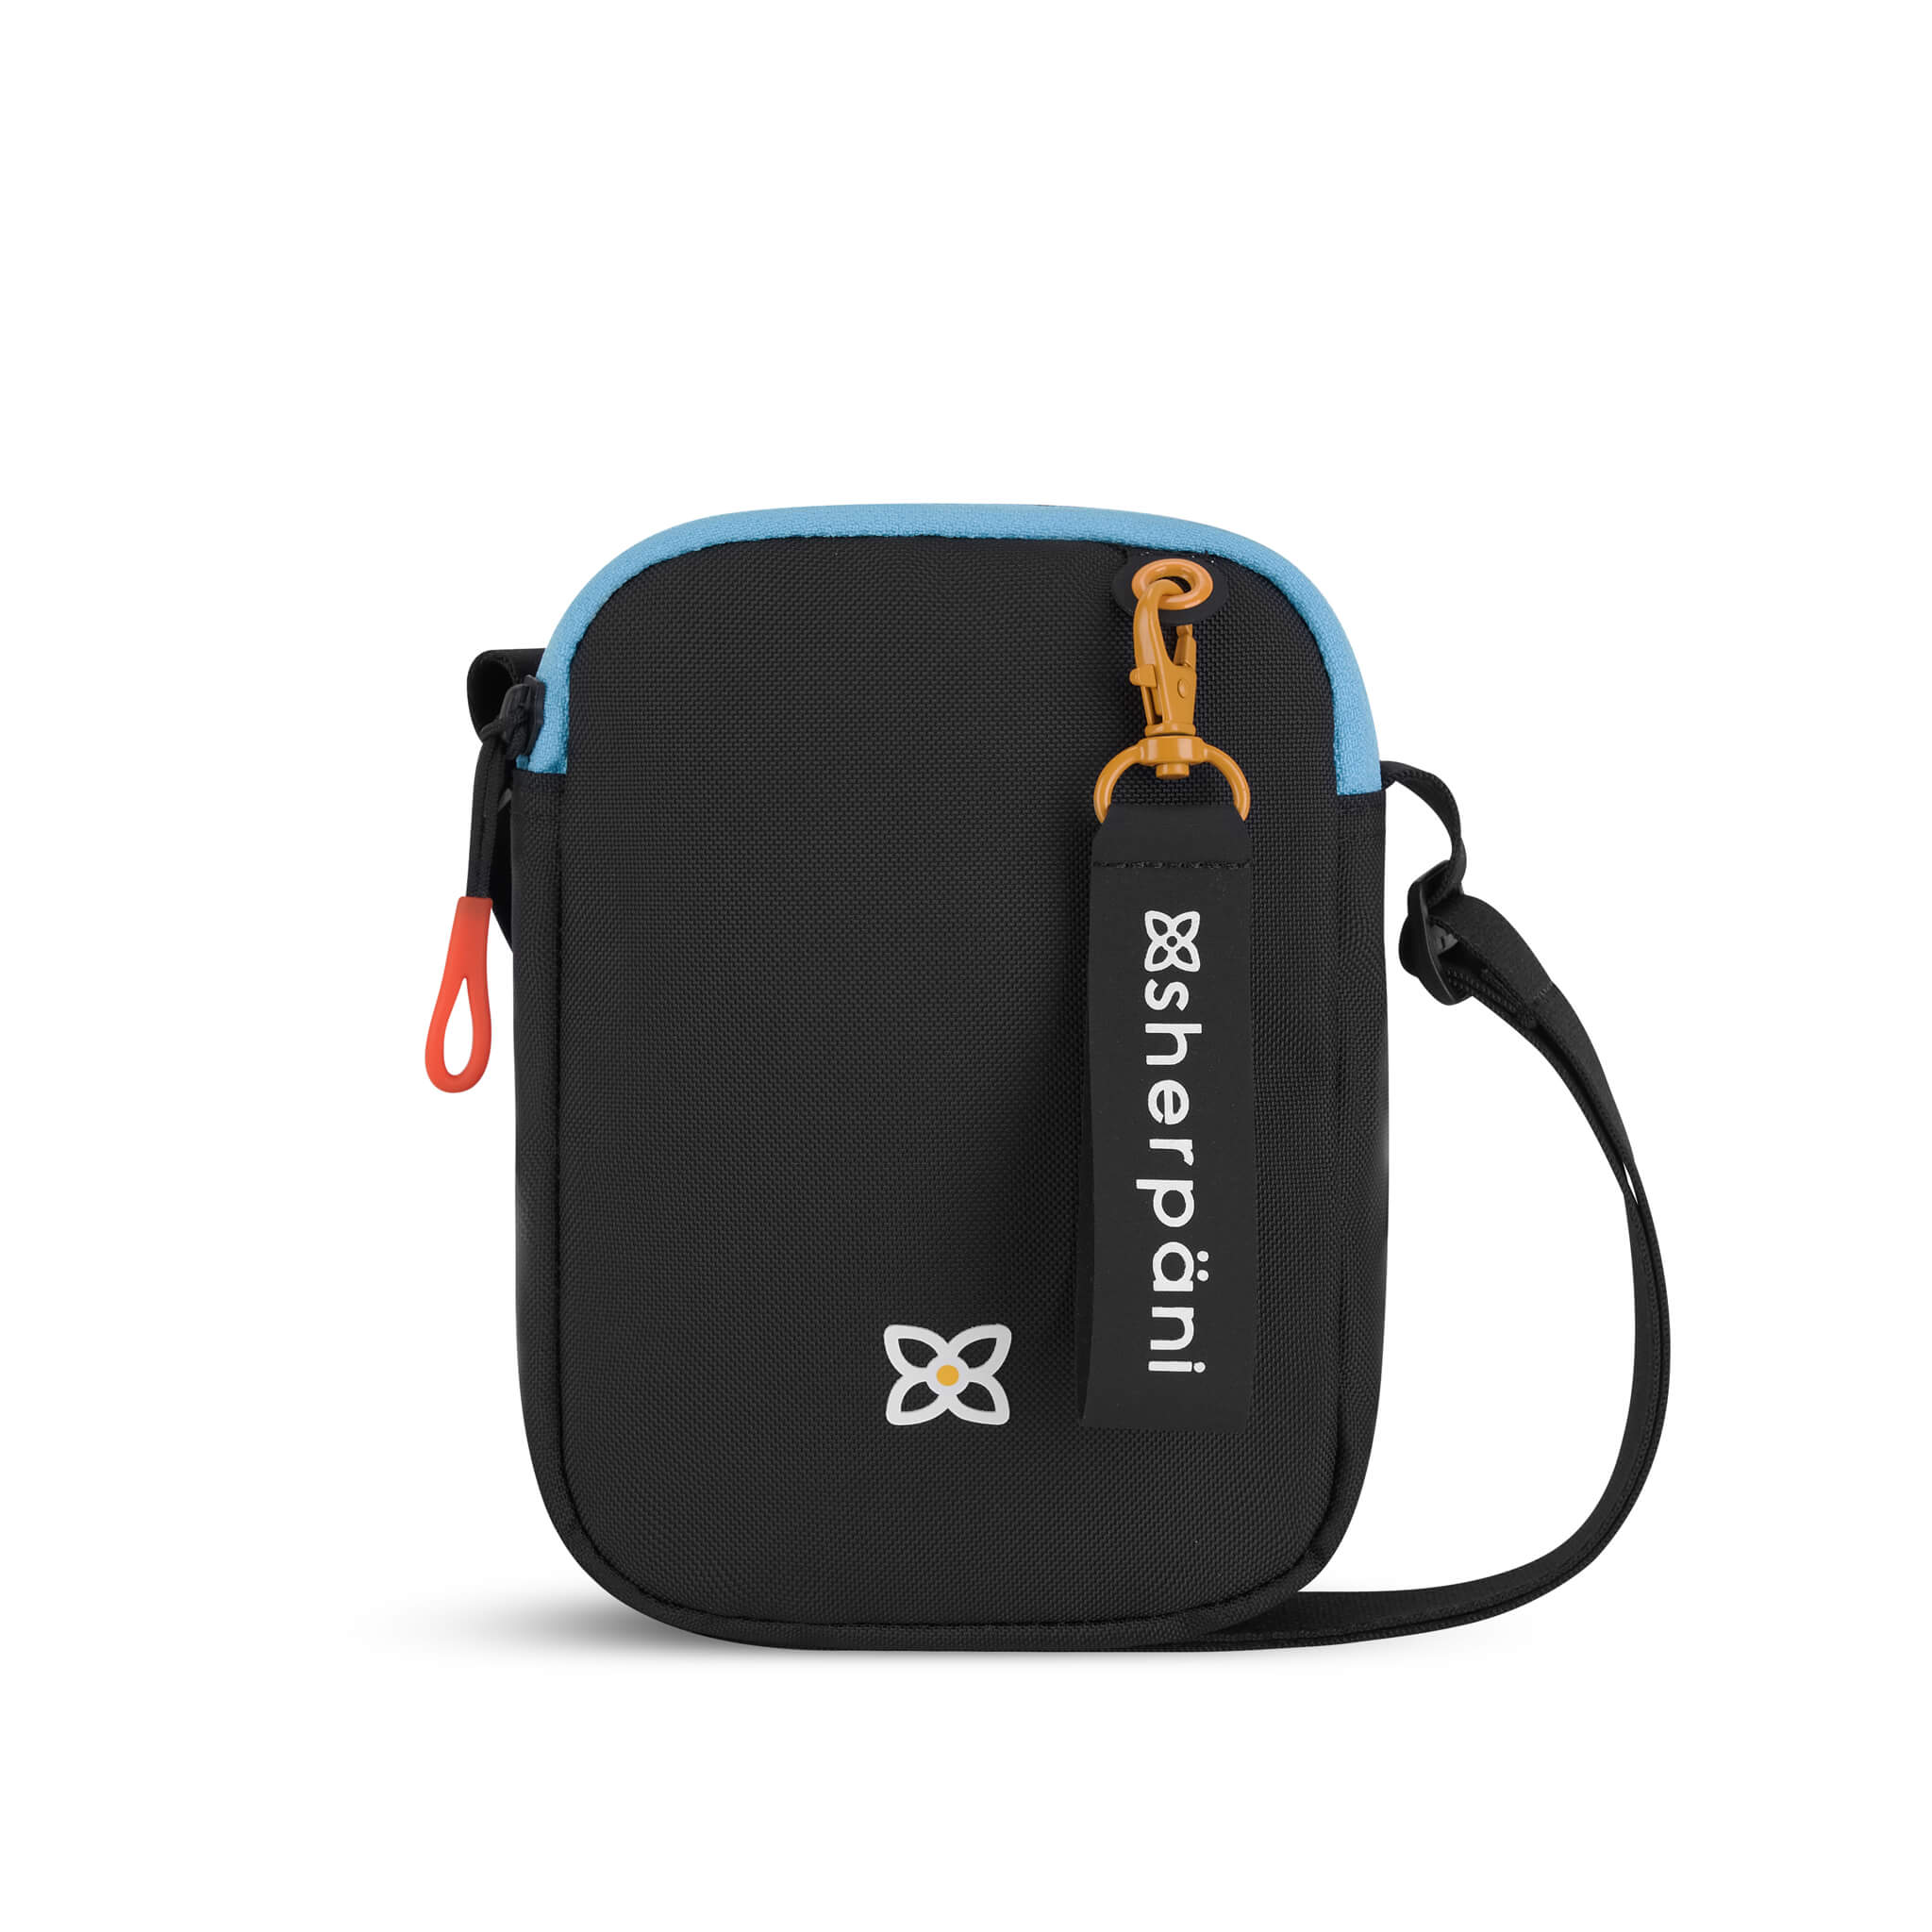 Flat front view of Sherpani mini crossbody purse, the Rogue in Chromatic. Rogue features include an adjustable crossbody strap, detachable keychain, compact design, minimalist bag, RFID protection and back slip pocket. The Chromatic color is mostly black with pops of color in blue, red and yellow. 